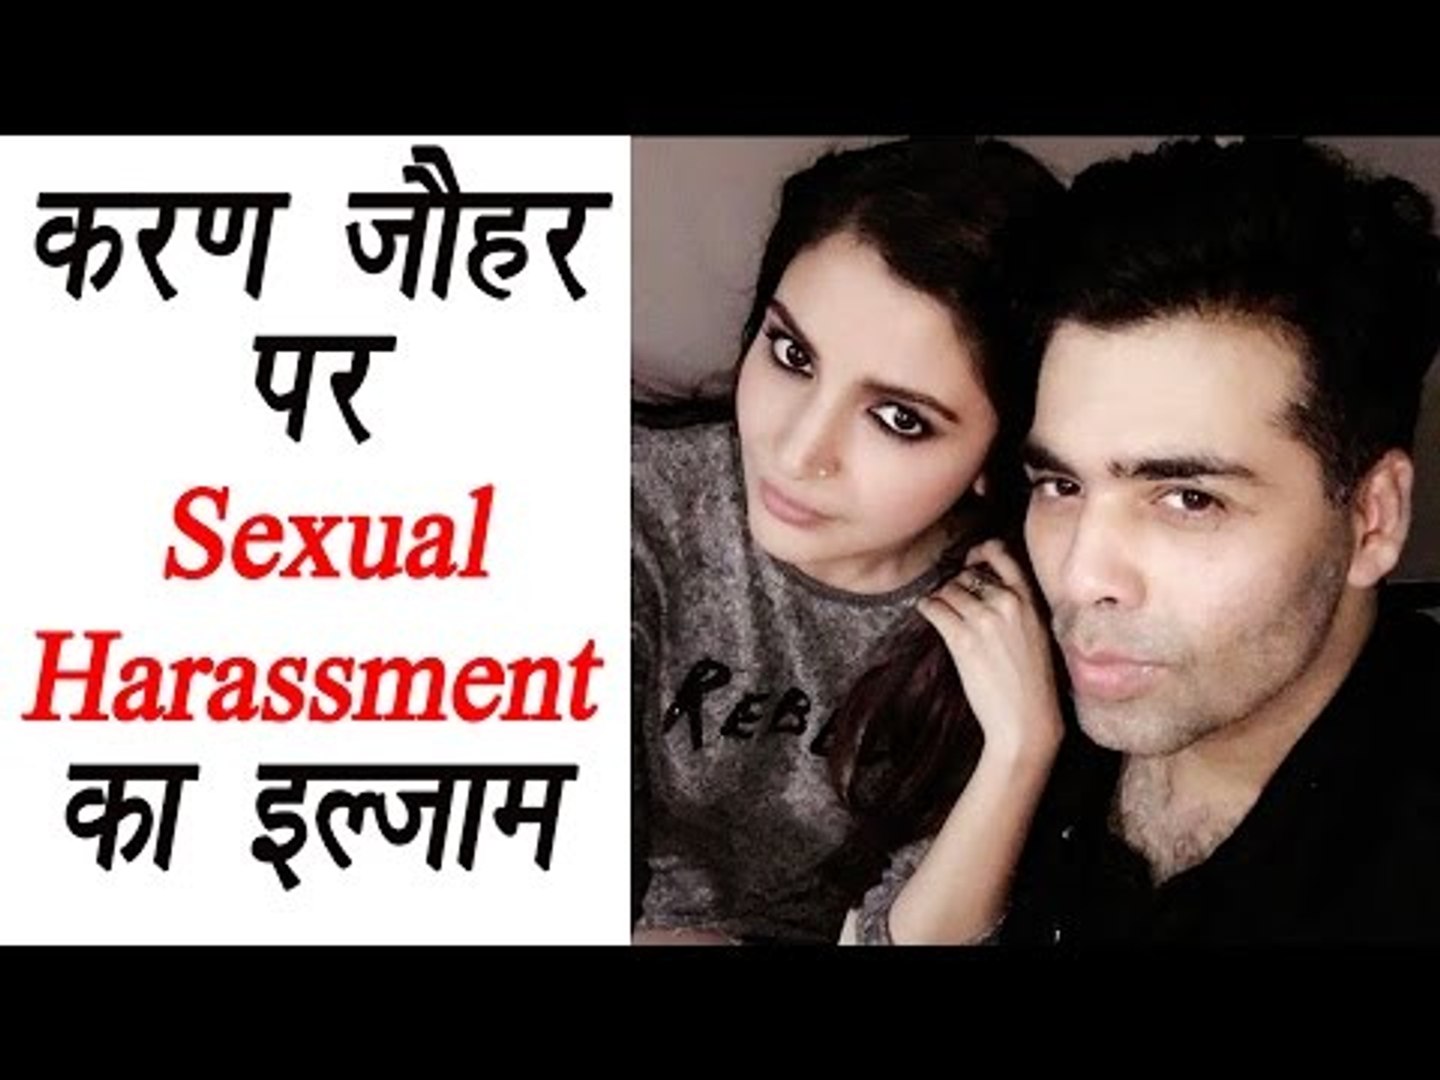 Anushka Anushka Sex Videos Sex Videos Anushka Sex Videos Sex Videos - Anushka Sharma wants to charge Karan Johar with Sexual Harassment case!!! |  FilmiBeat - video Dailymotion